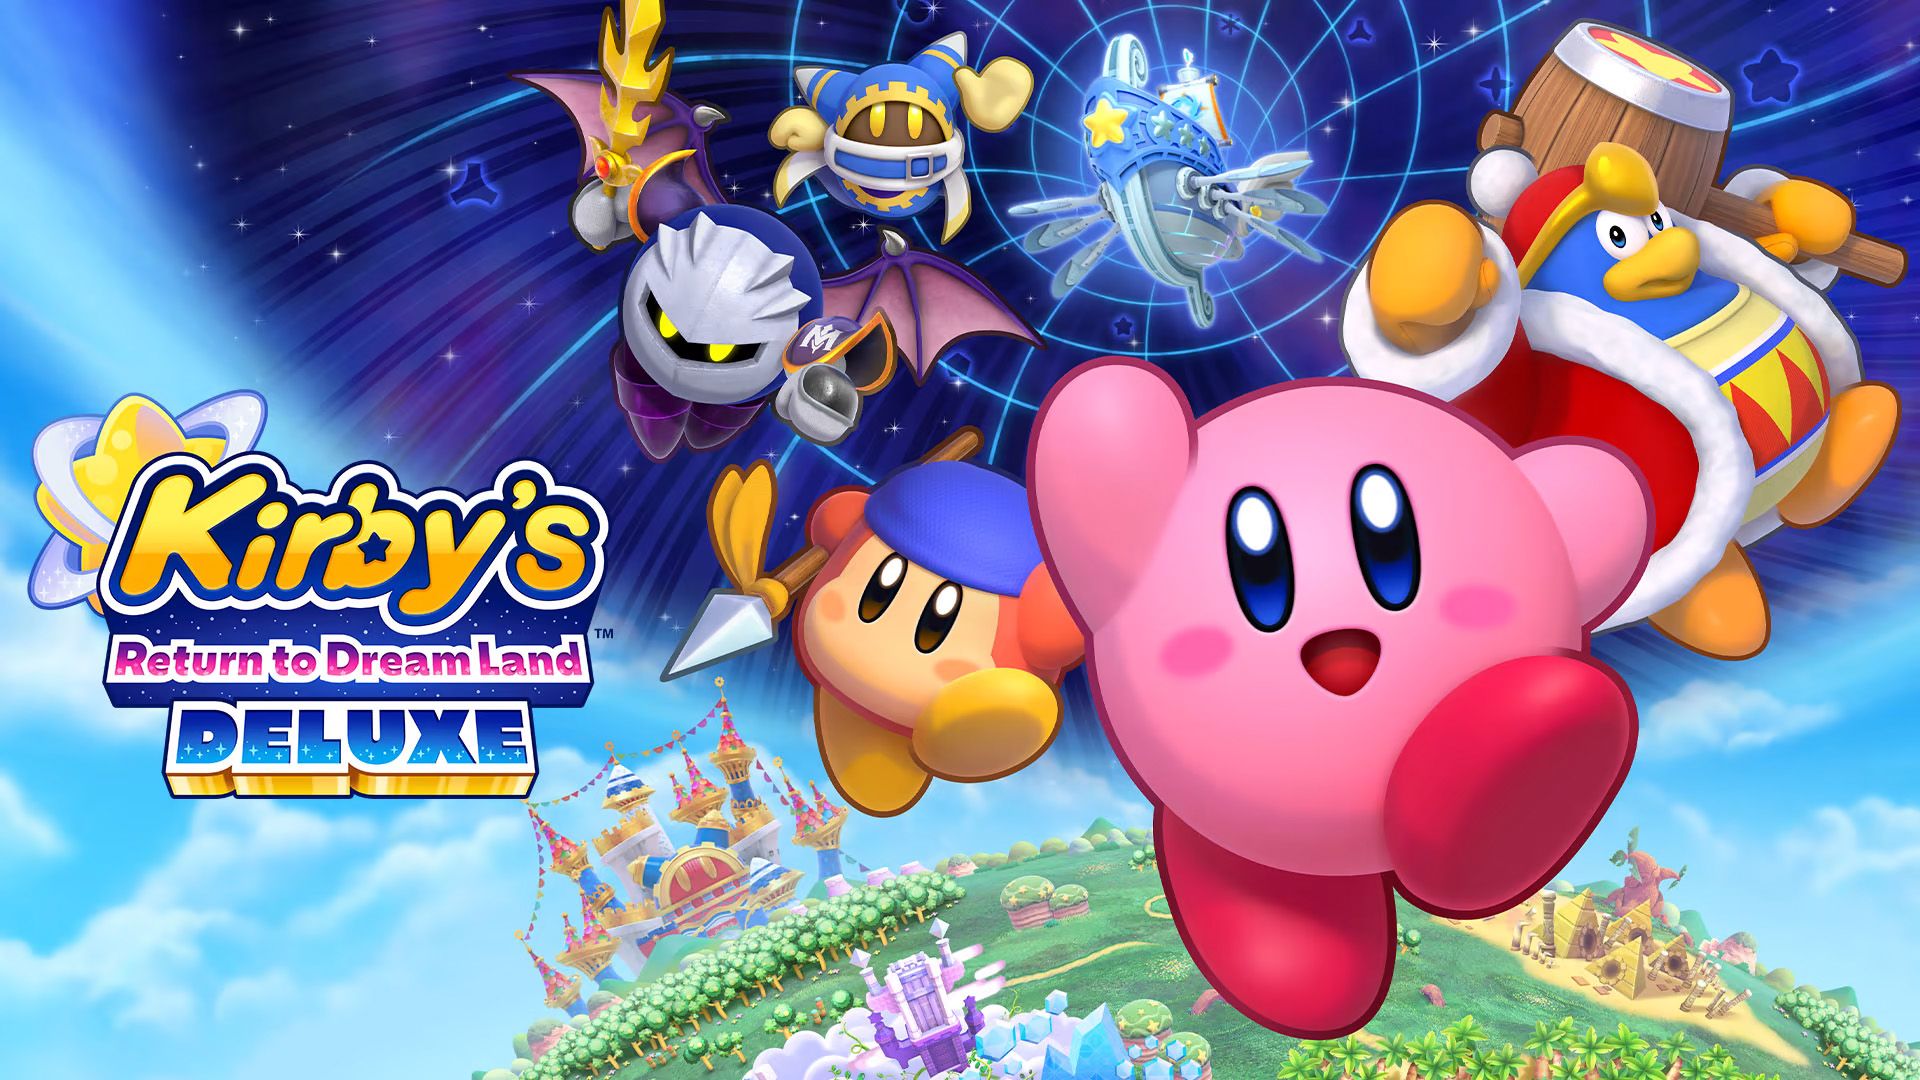 The best Kirby's Return to Dream Land Deluxe pre-order deals